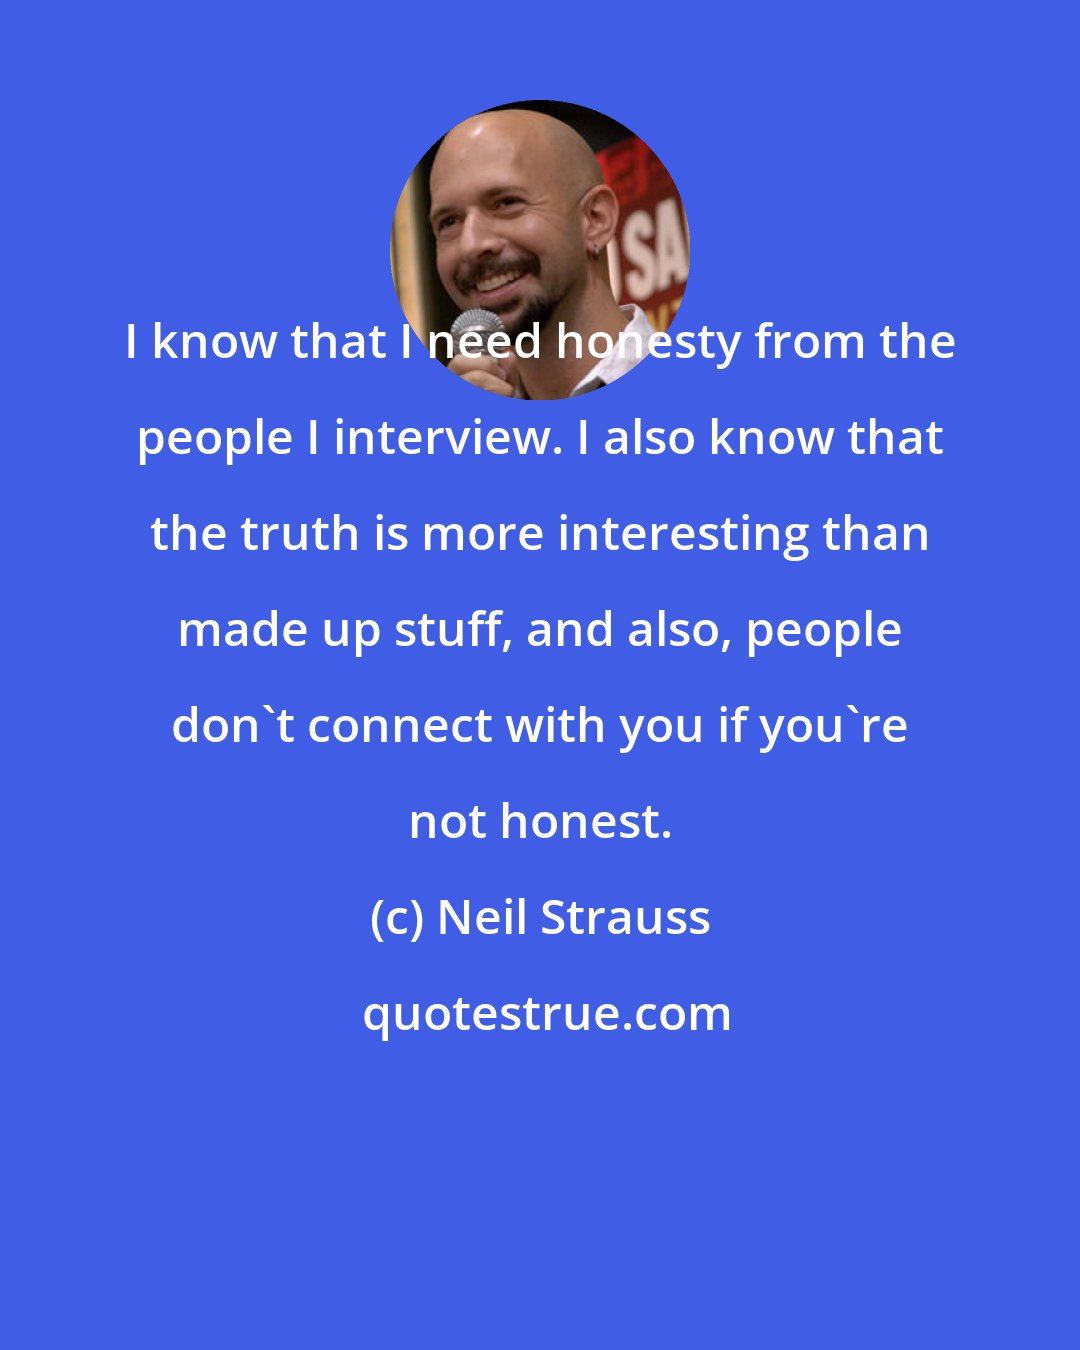 Neil Strauss: I know that I need honesty from the people I interview. I also know that the truth is more interesting than made up stuff, and also, people don't connect with you if you're not honest.